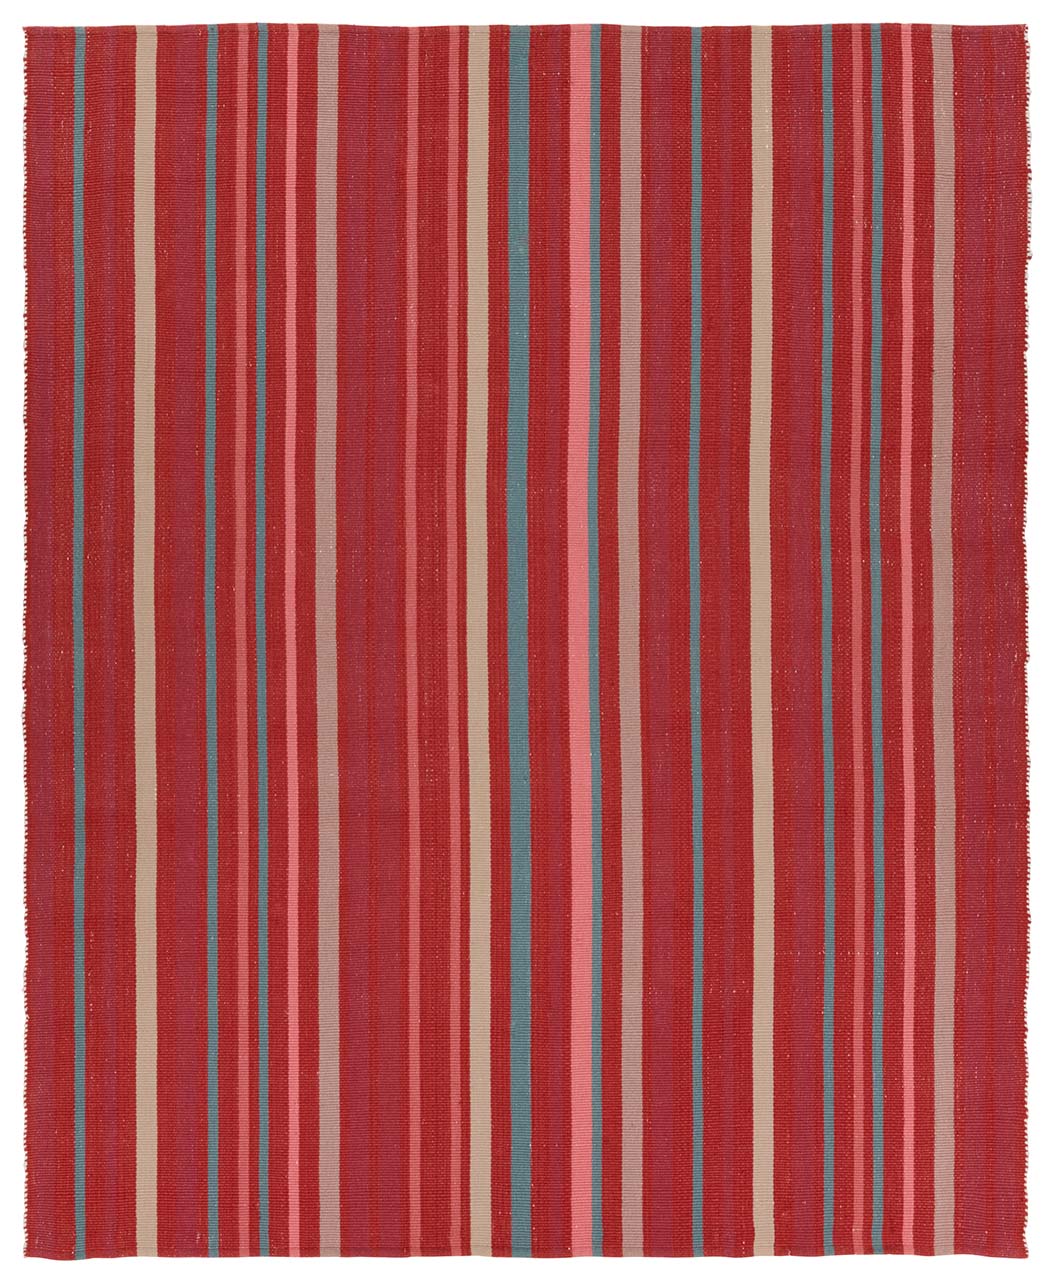 Vibe by Jaipur Living Viviana Handmade Striped Red/Blue Area Rug  Product Image